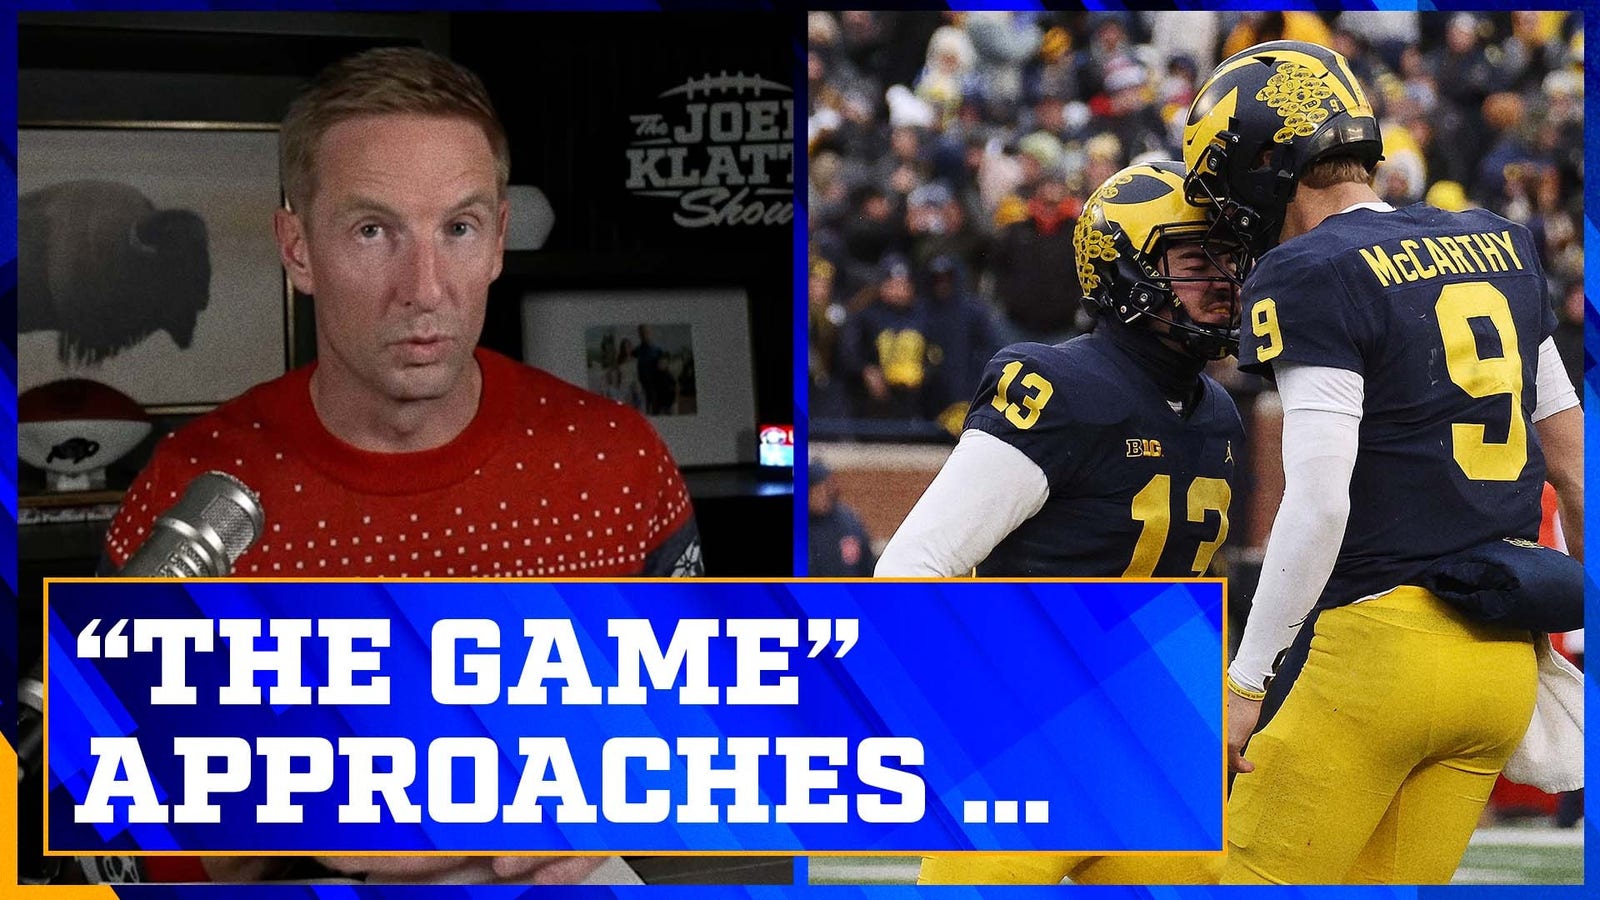 Ohio State, Michigan both 11-0 heading into 'The Game'